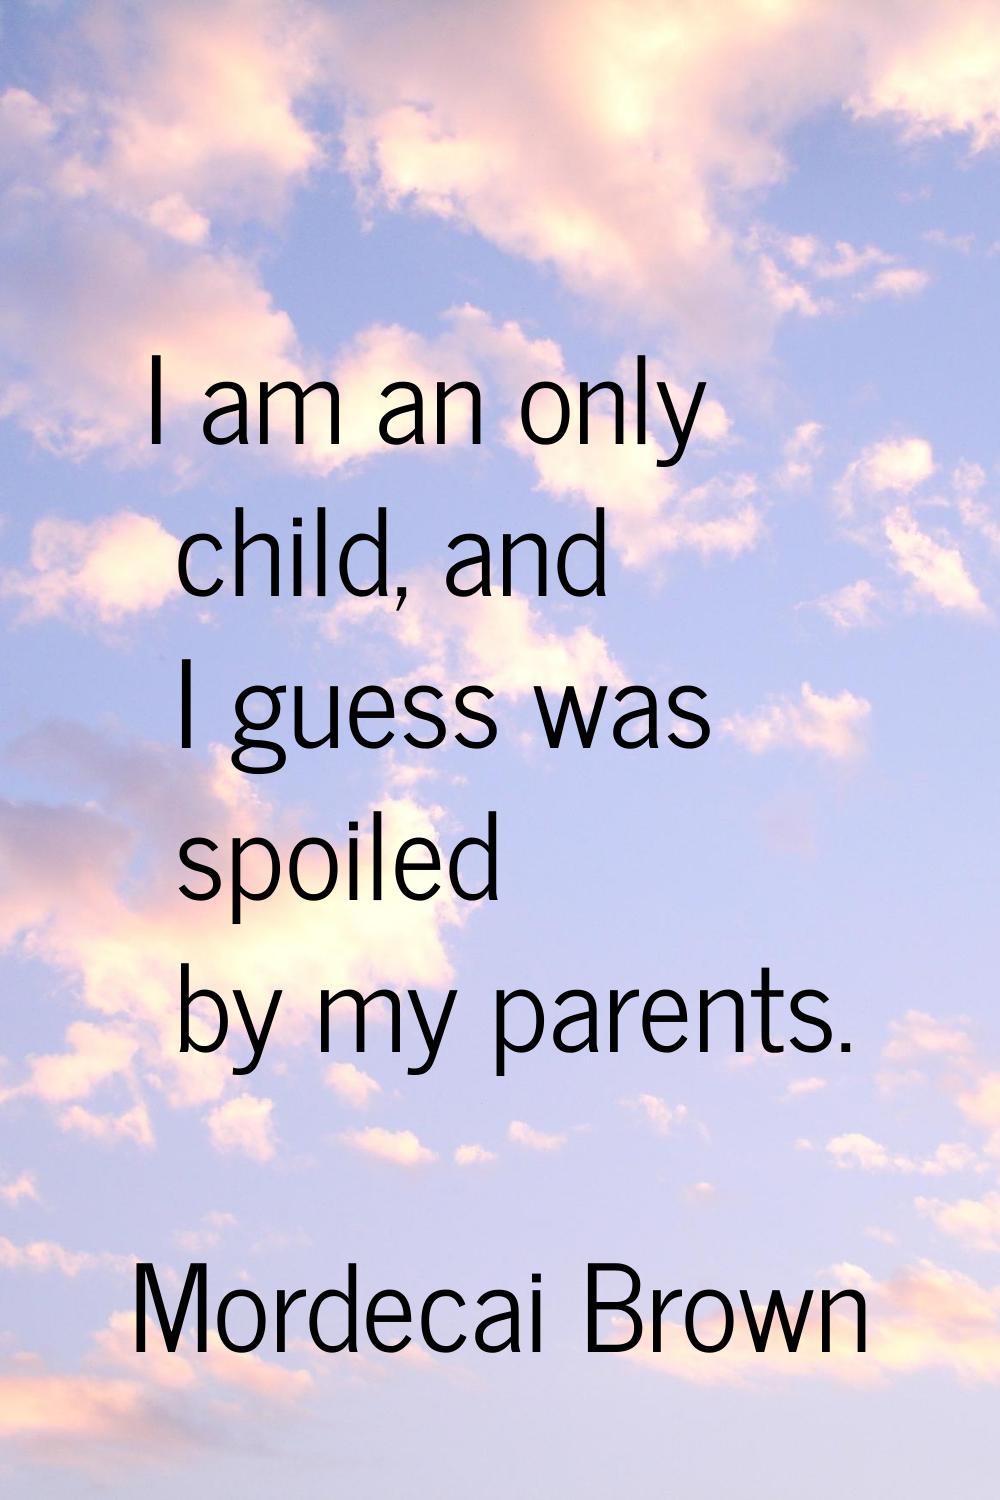 I am an only child, and I guess was spoiled by my parents.